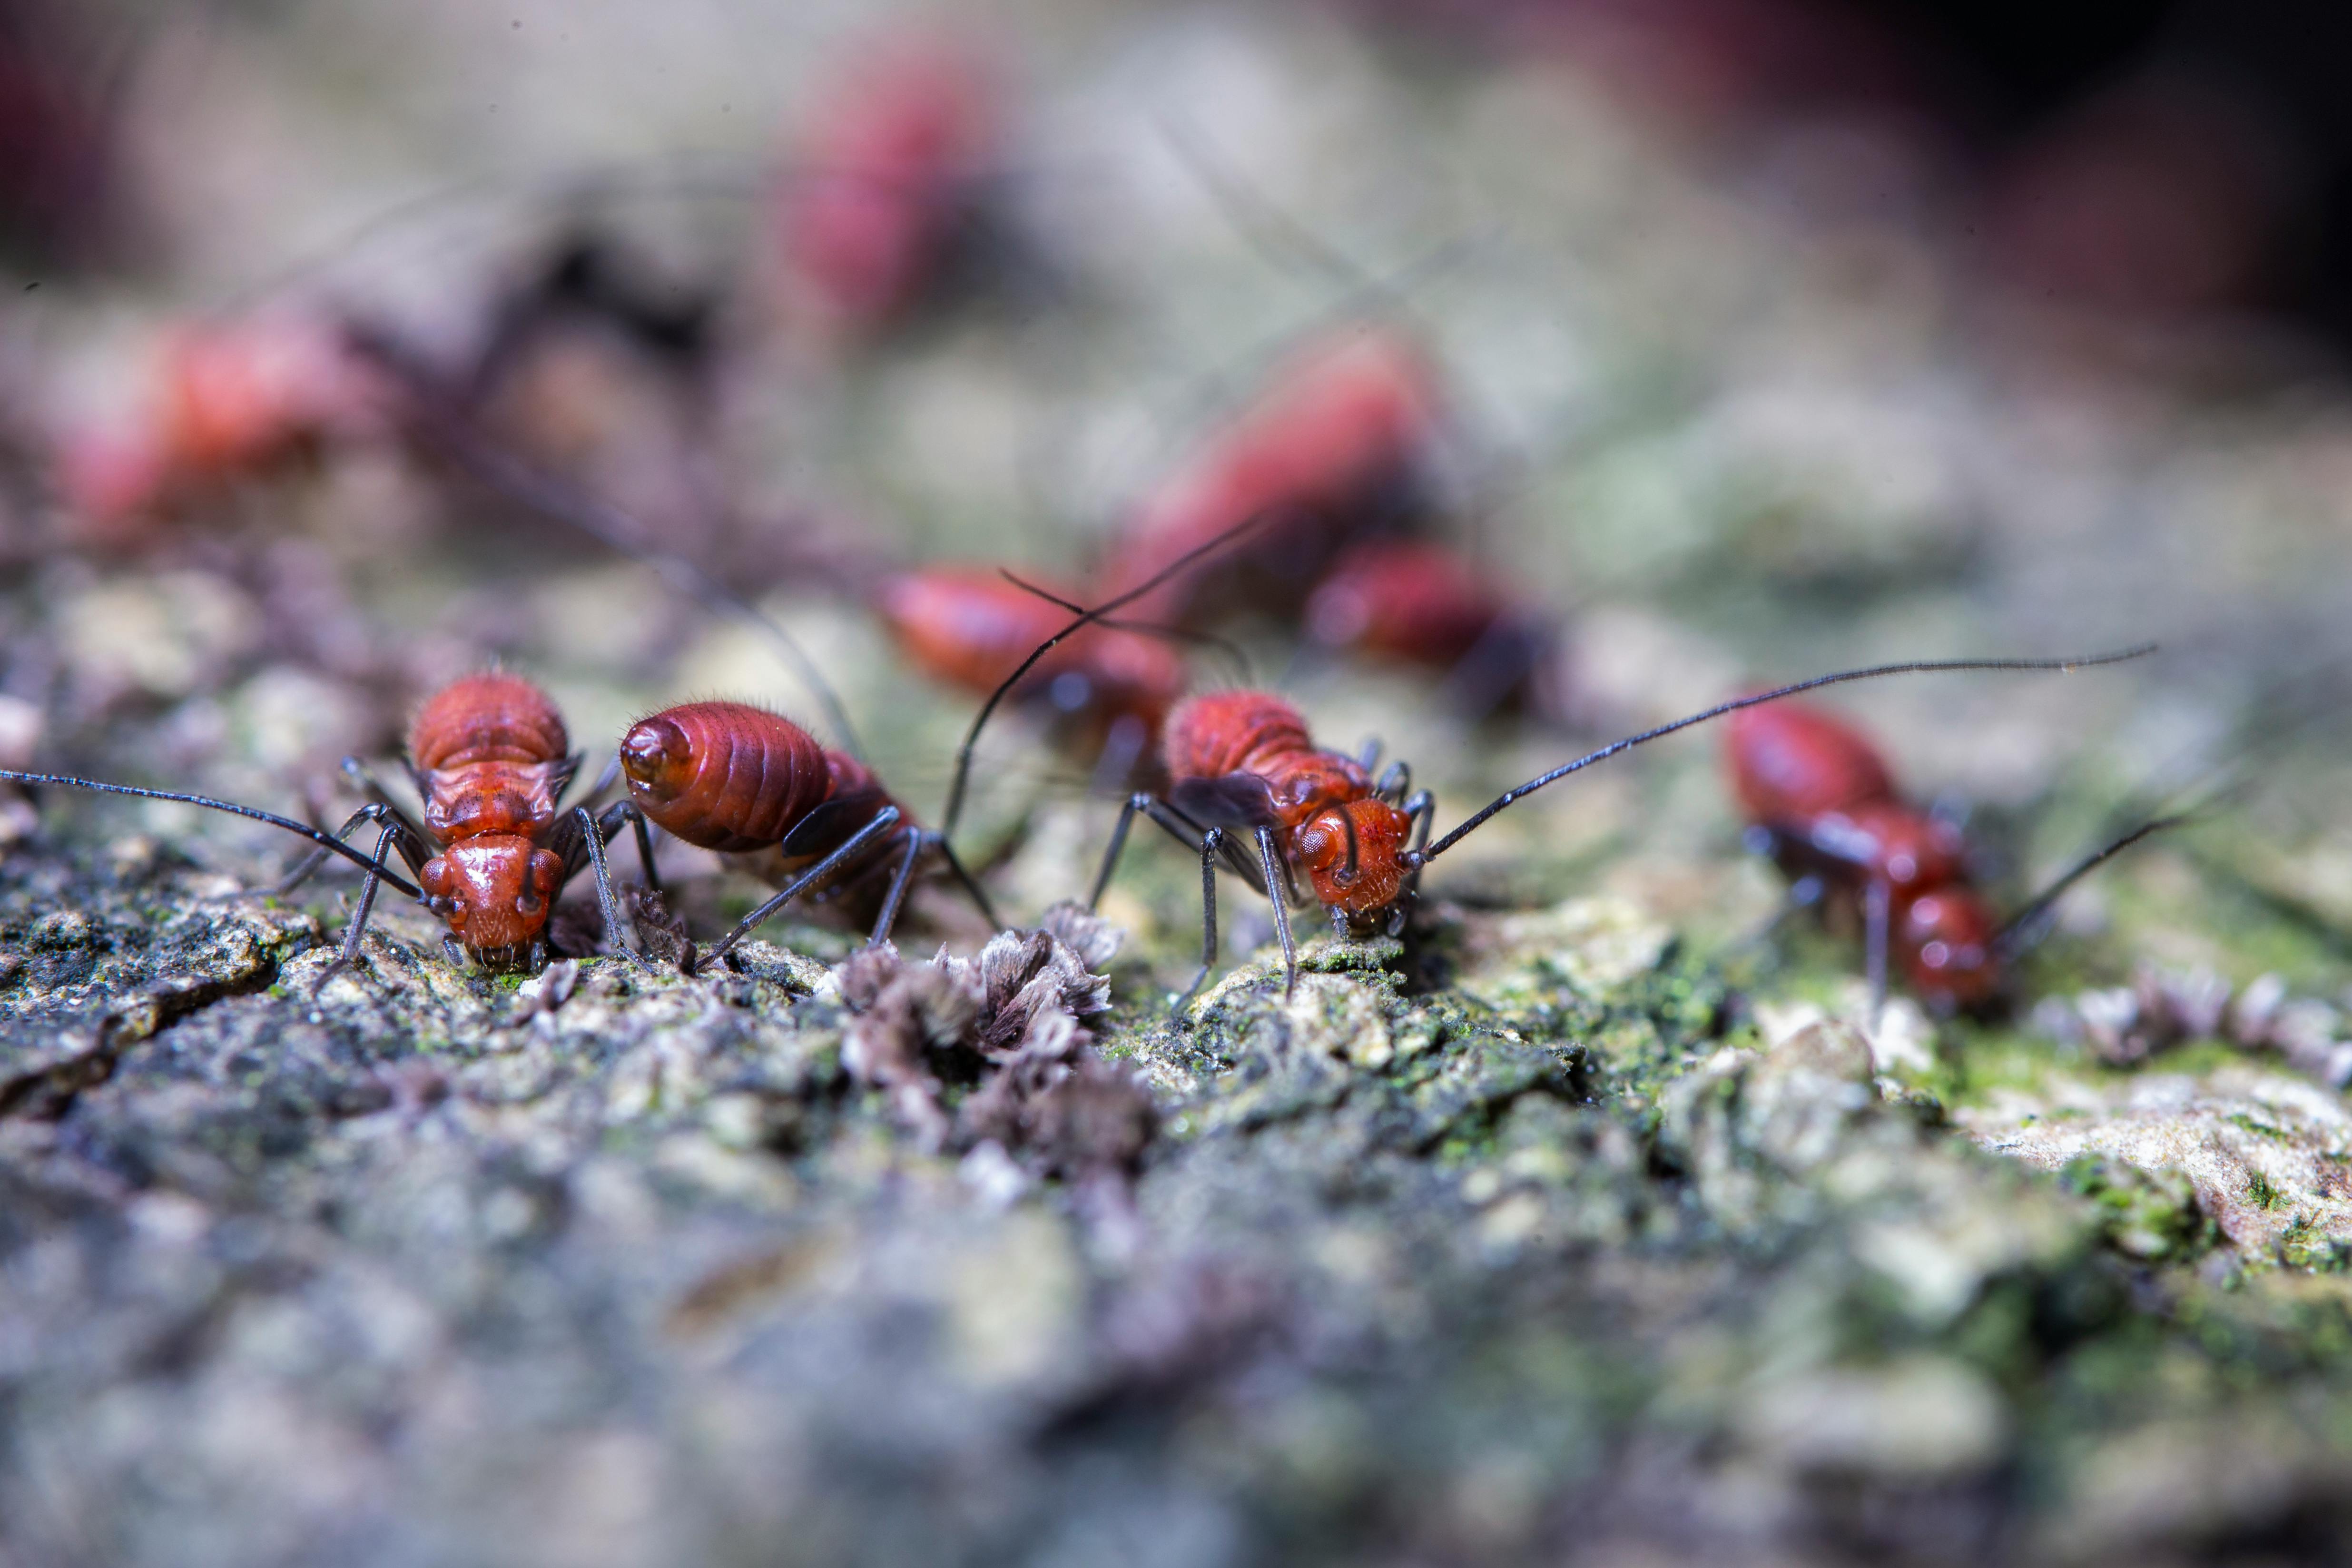 Ant Control Experts in Round Rock, TX